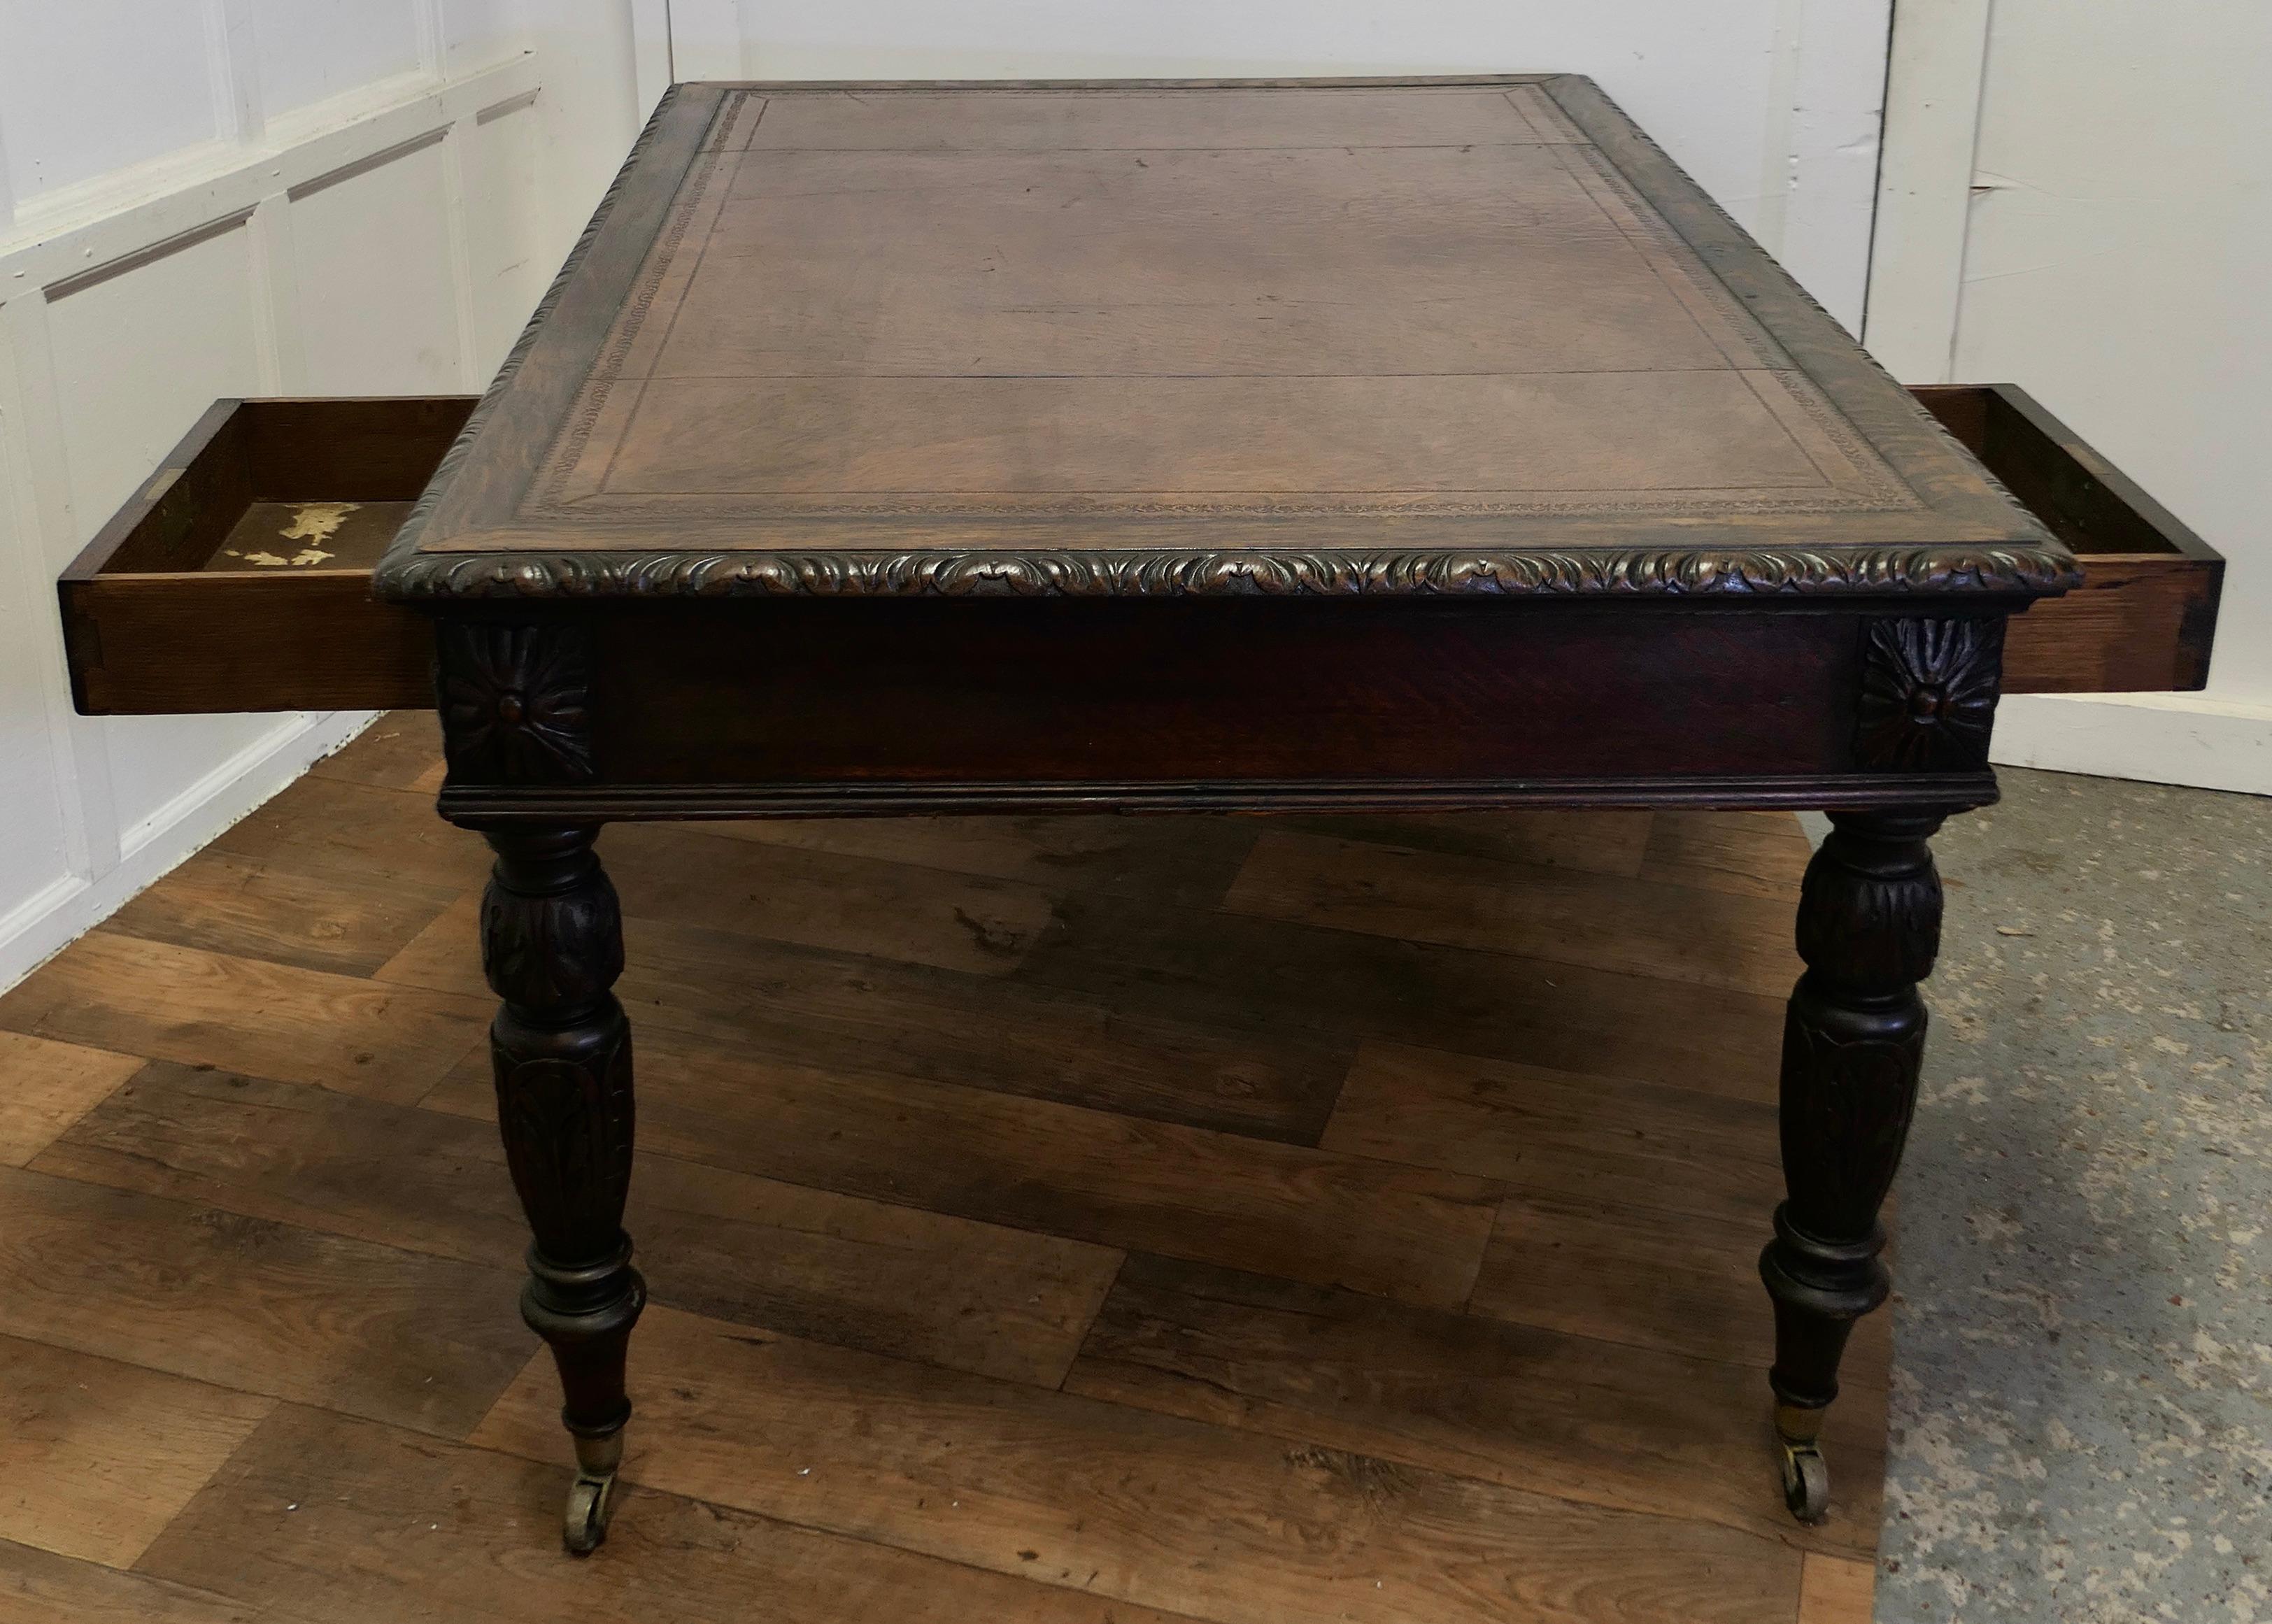  Large Victorian Oak Leather Top Partners Desk, EDWARDS & ROBERTS Library Table  4